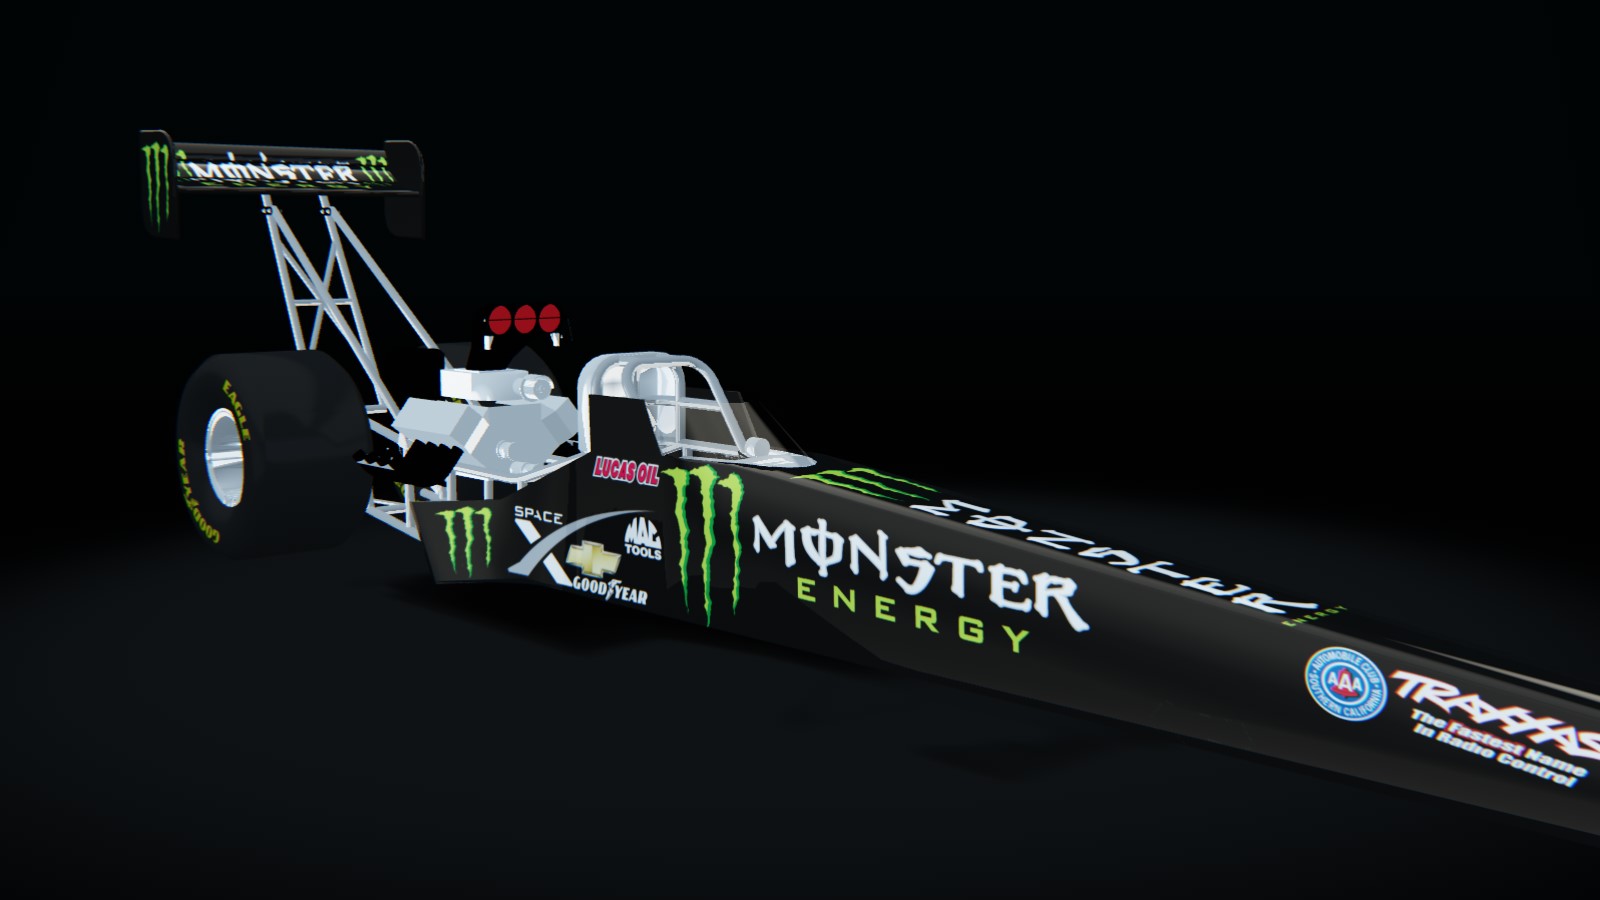 Top Fuel Dragster Preview Image